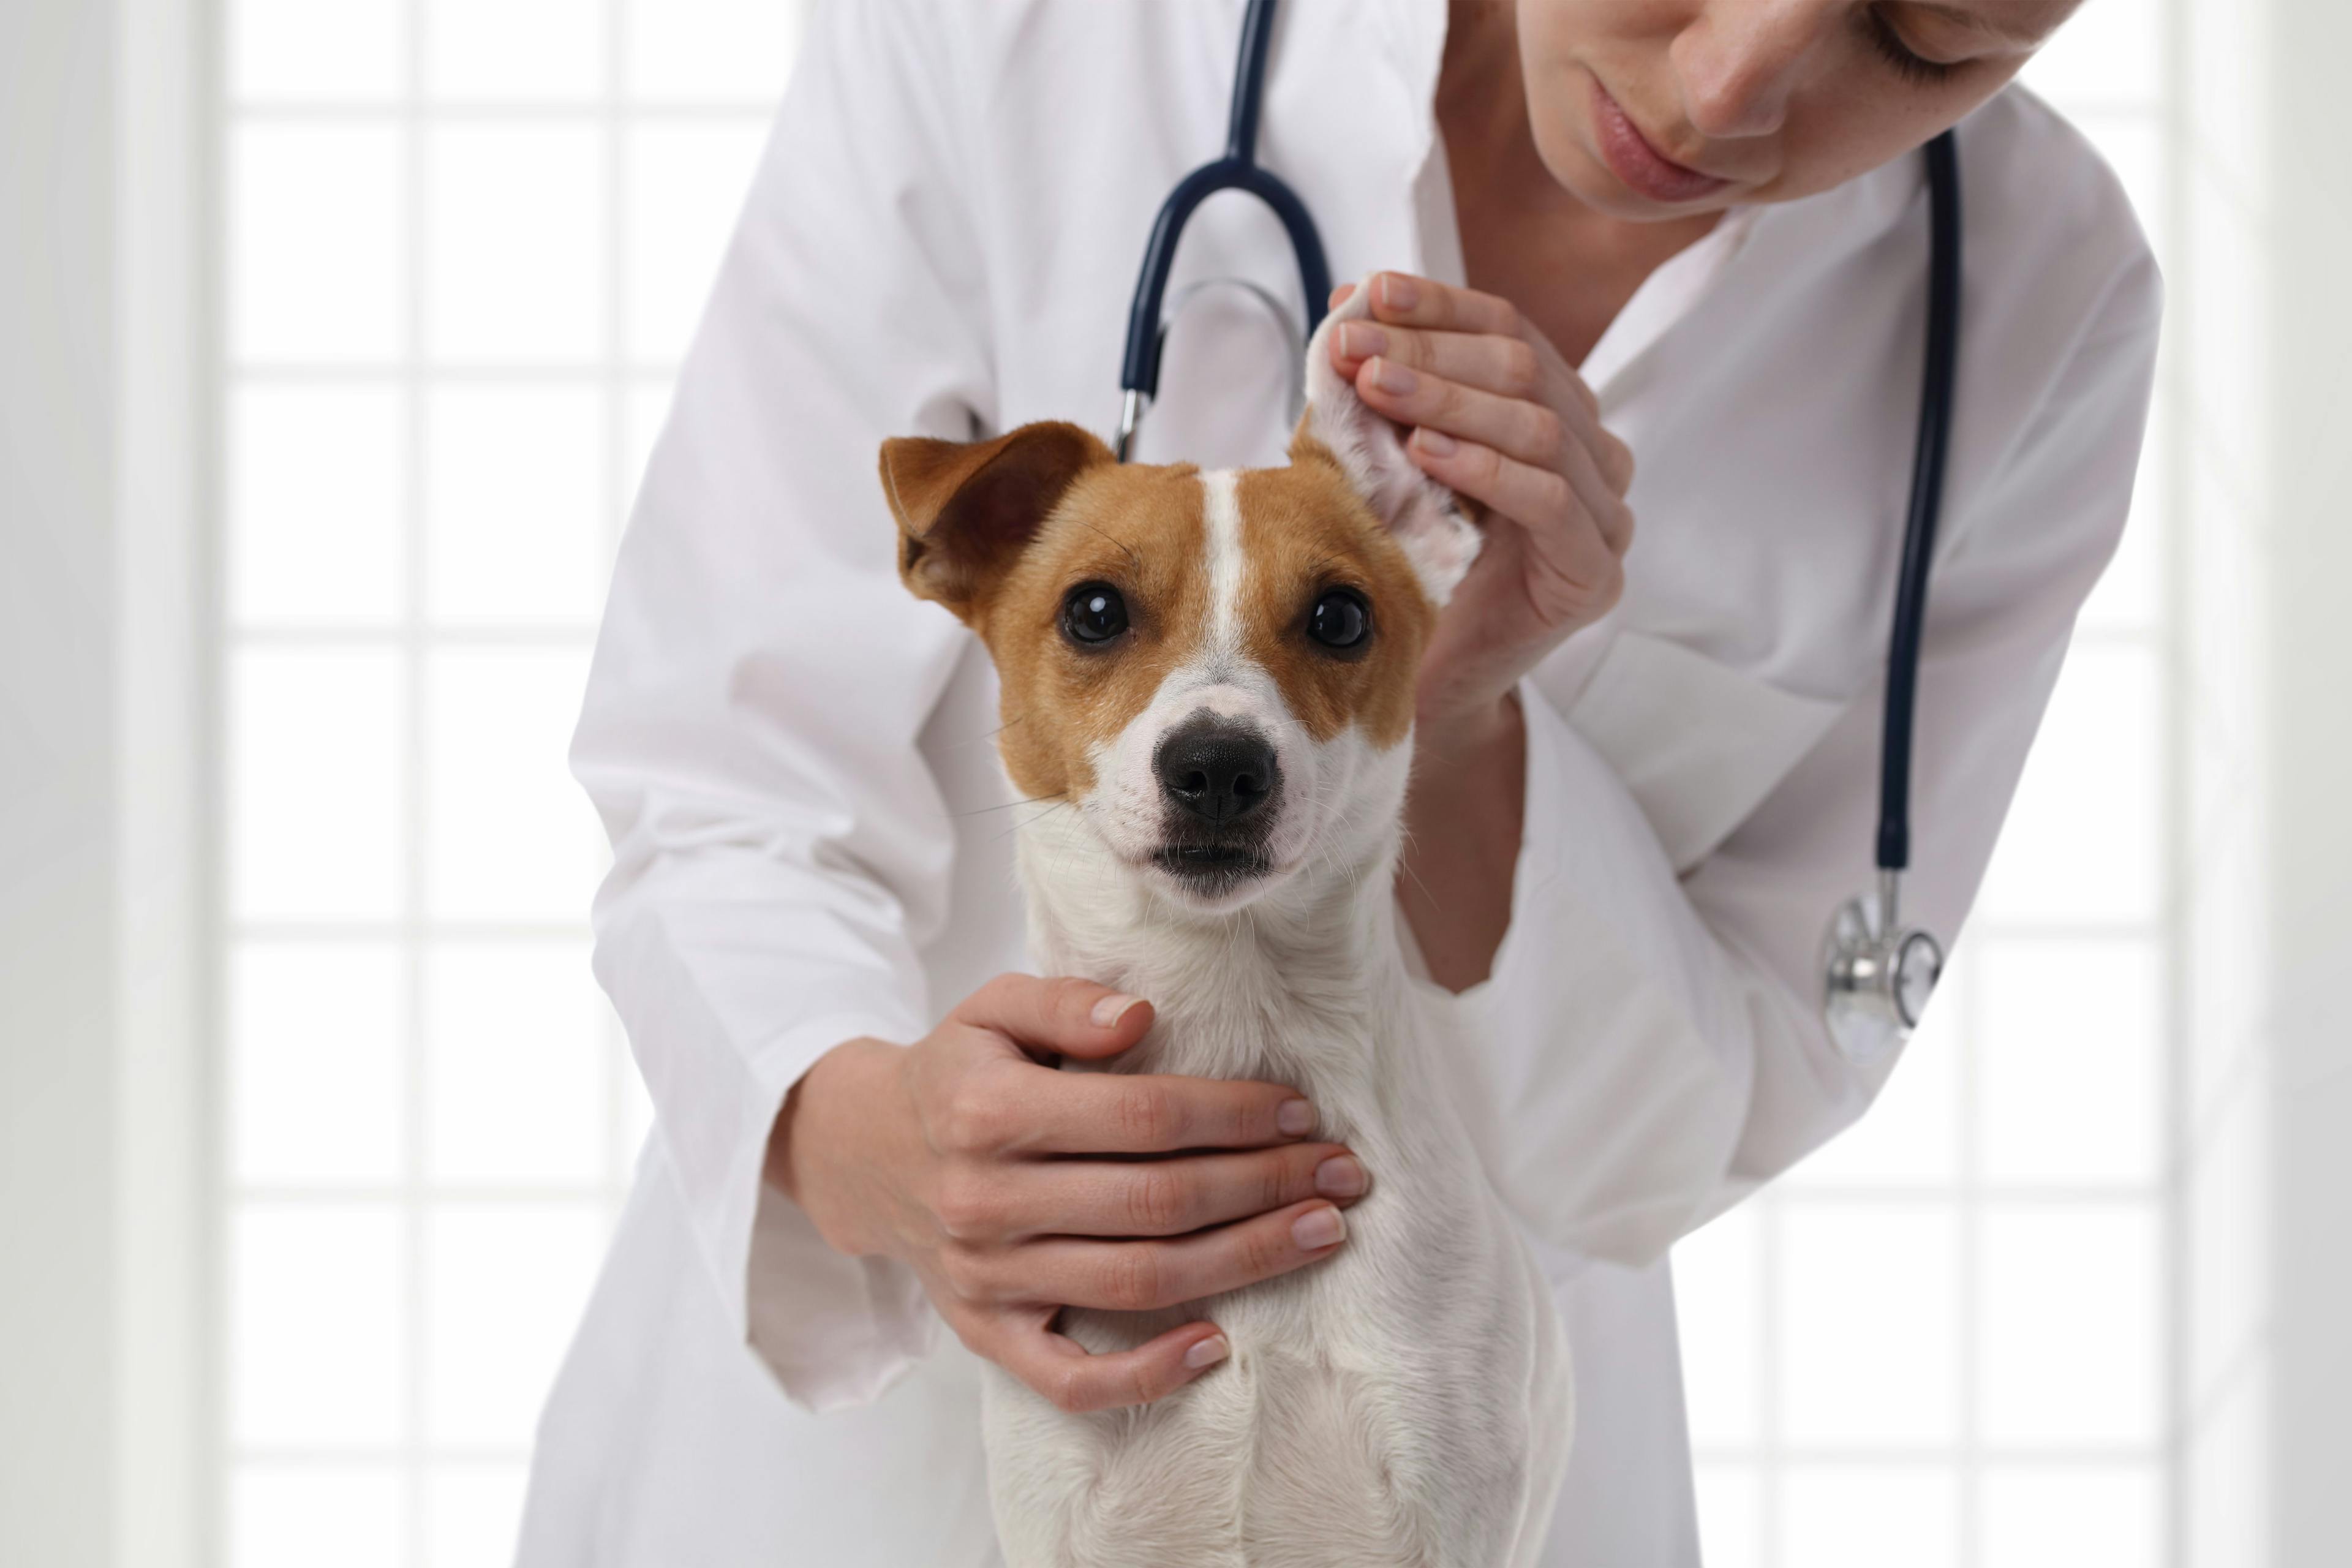 Charity invests in program addressing access to veterinary care 